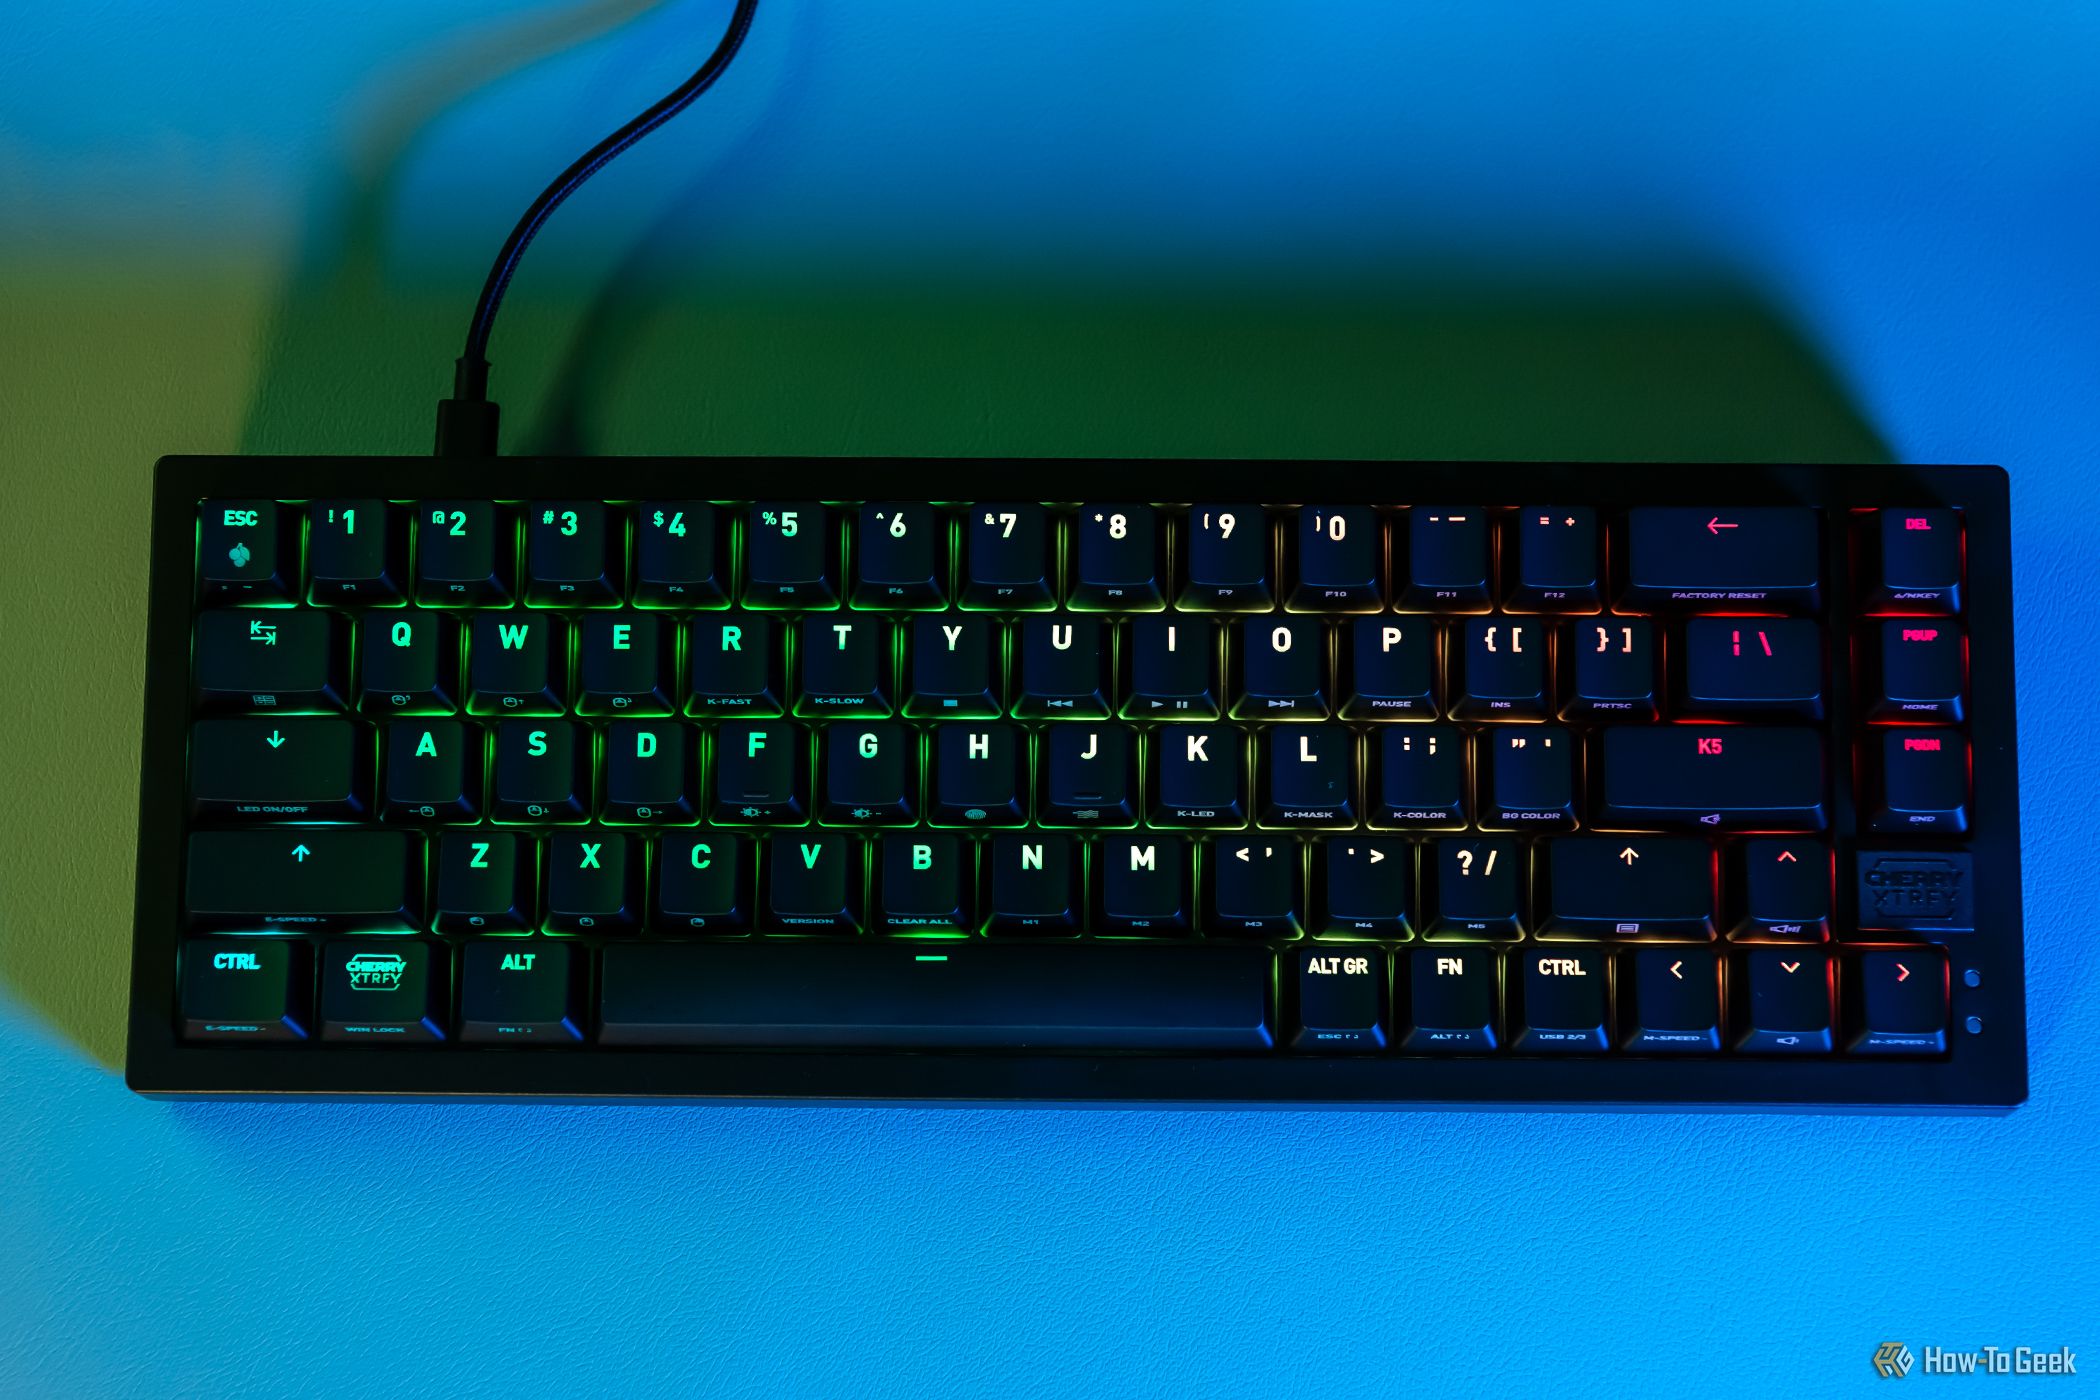 Top view of the Cherry Xtrfy K5V2 keyboard